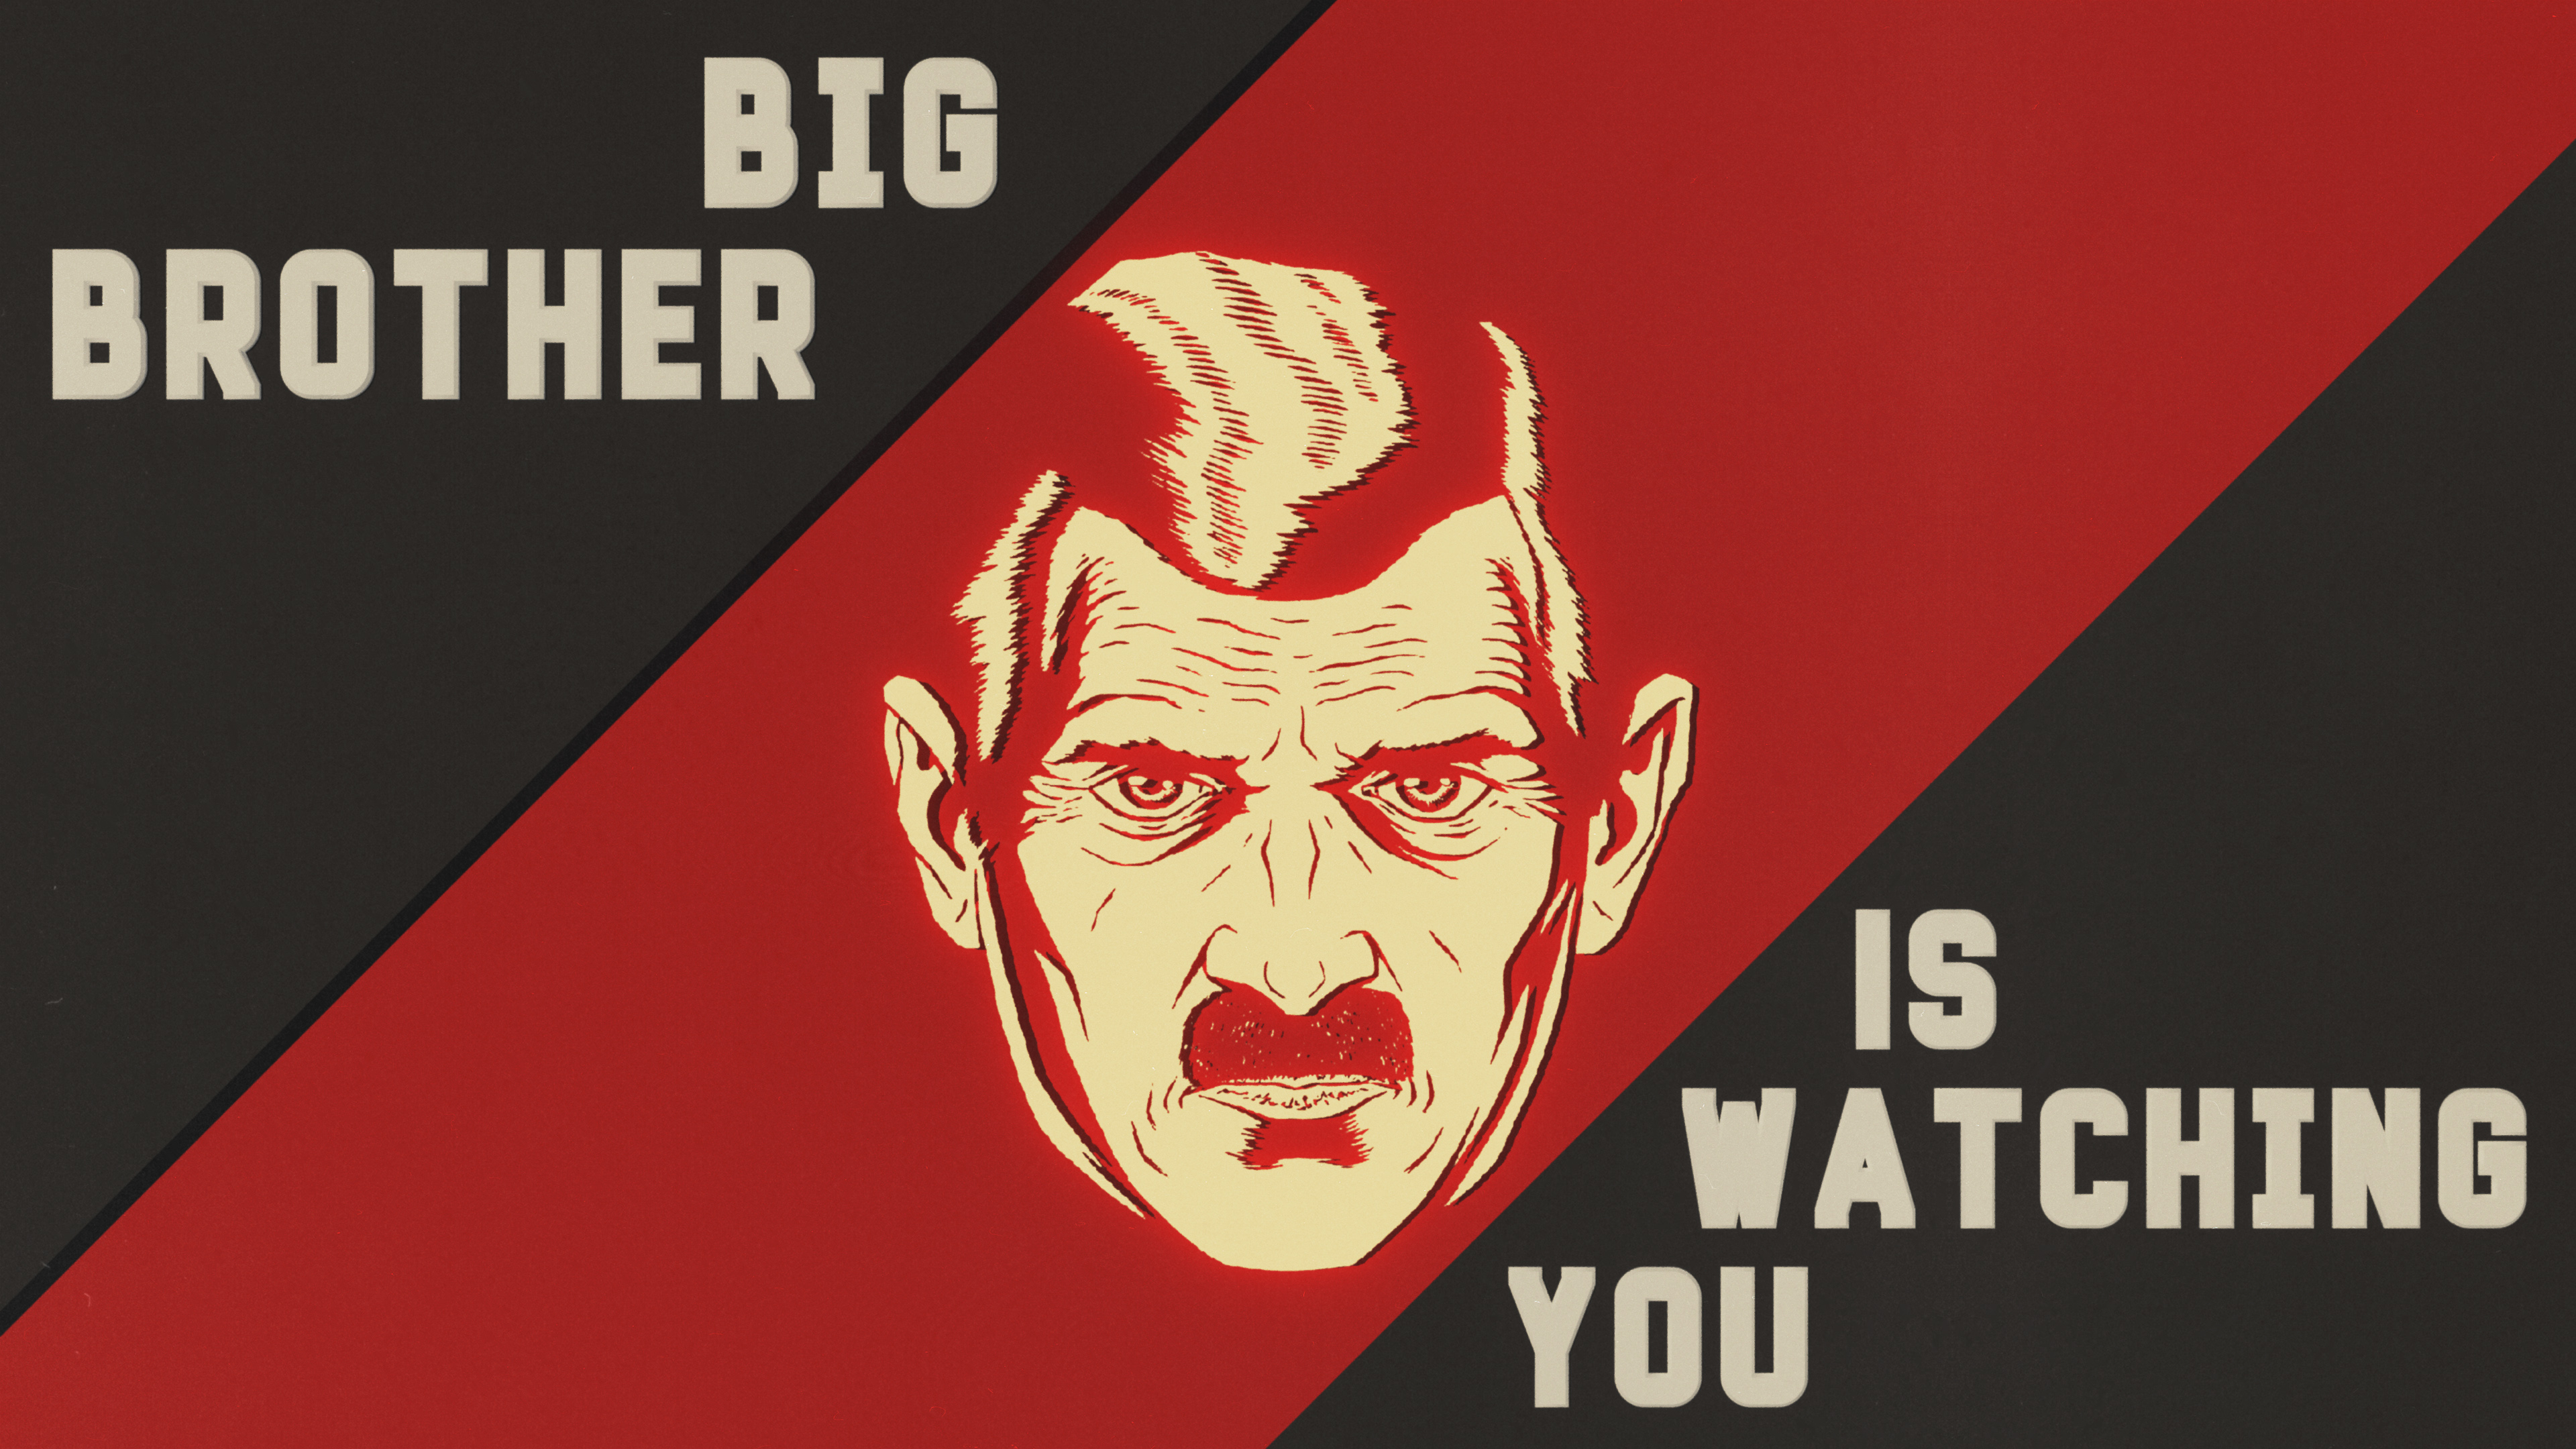 General 3840x2160 George Orwell totalitarianism big brother red text face retro style Blender CGI 1984 men moustache